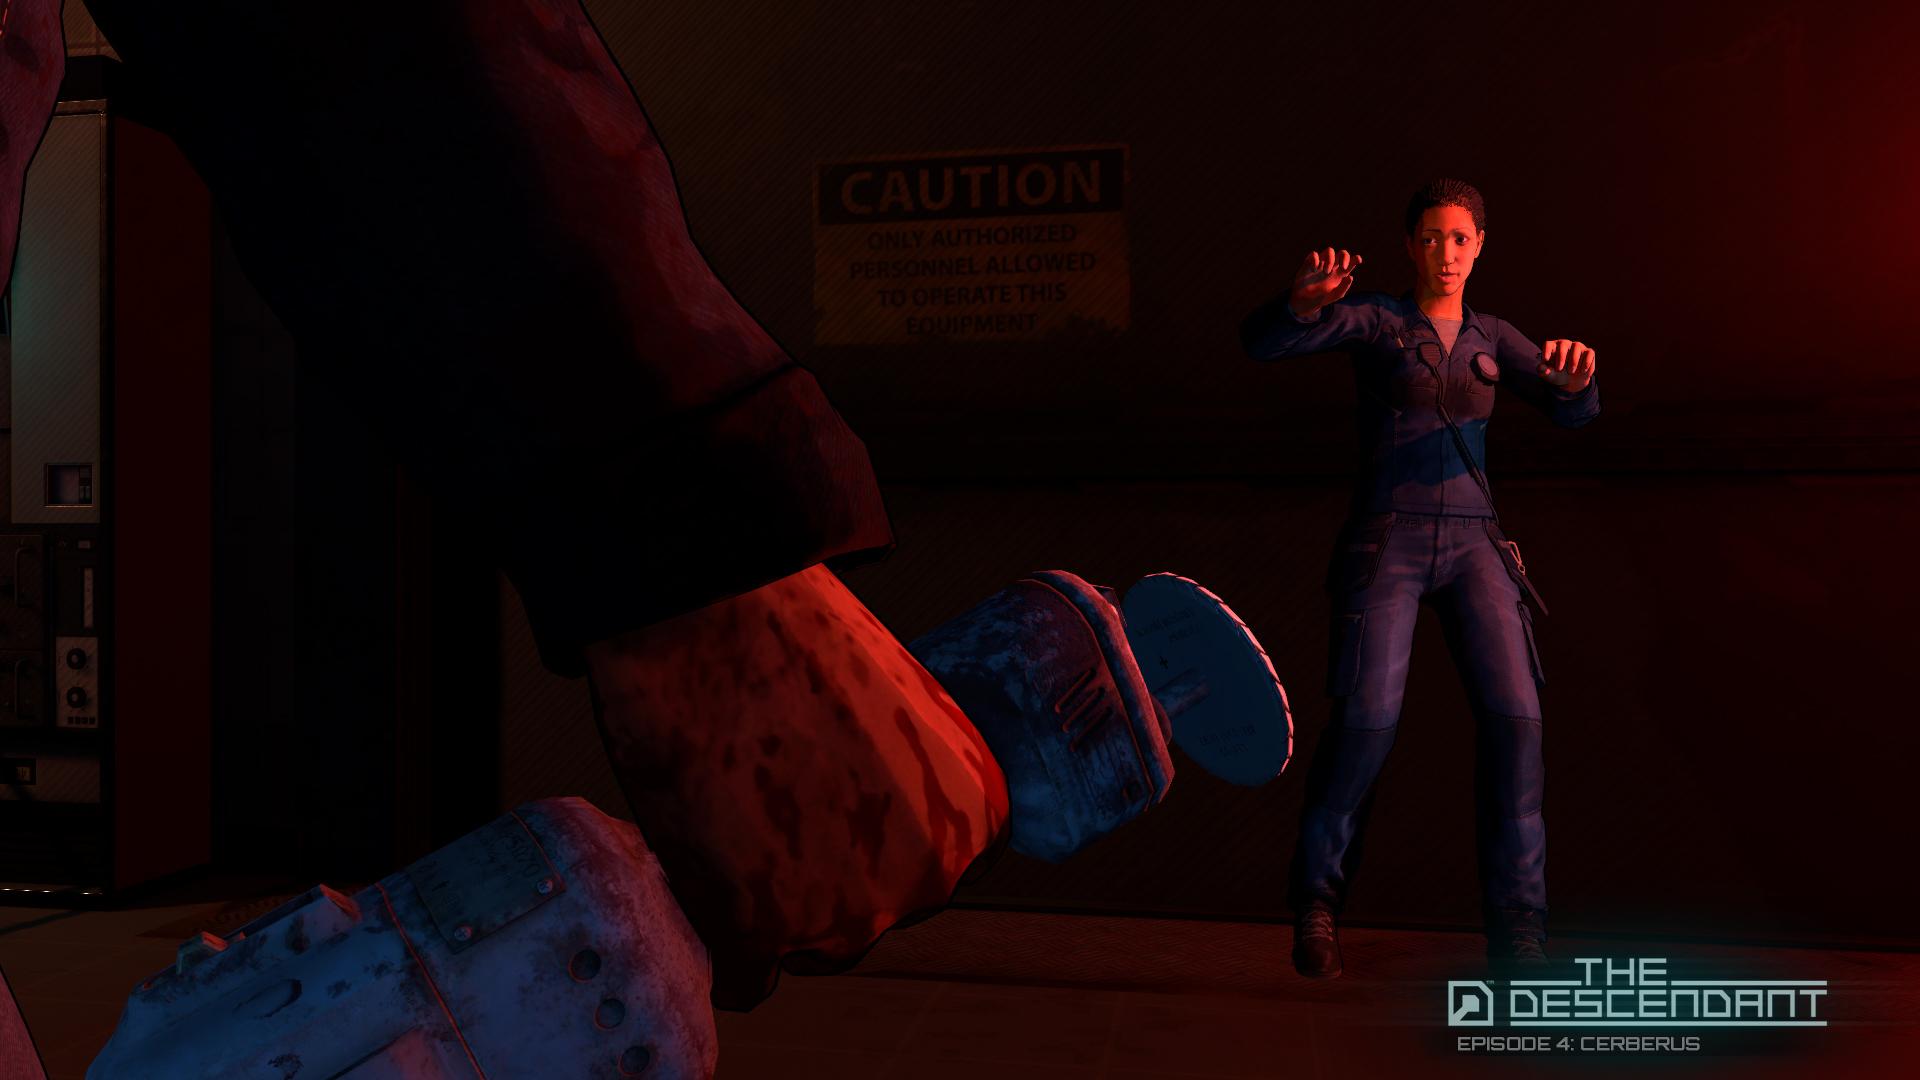 Screenshot №10 from game The Descendant